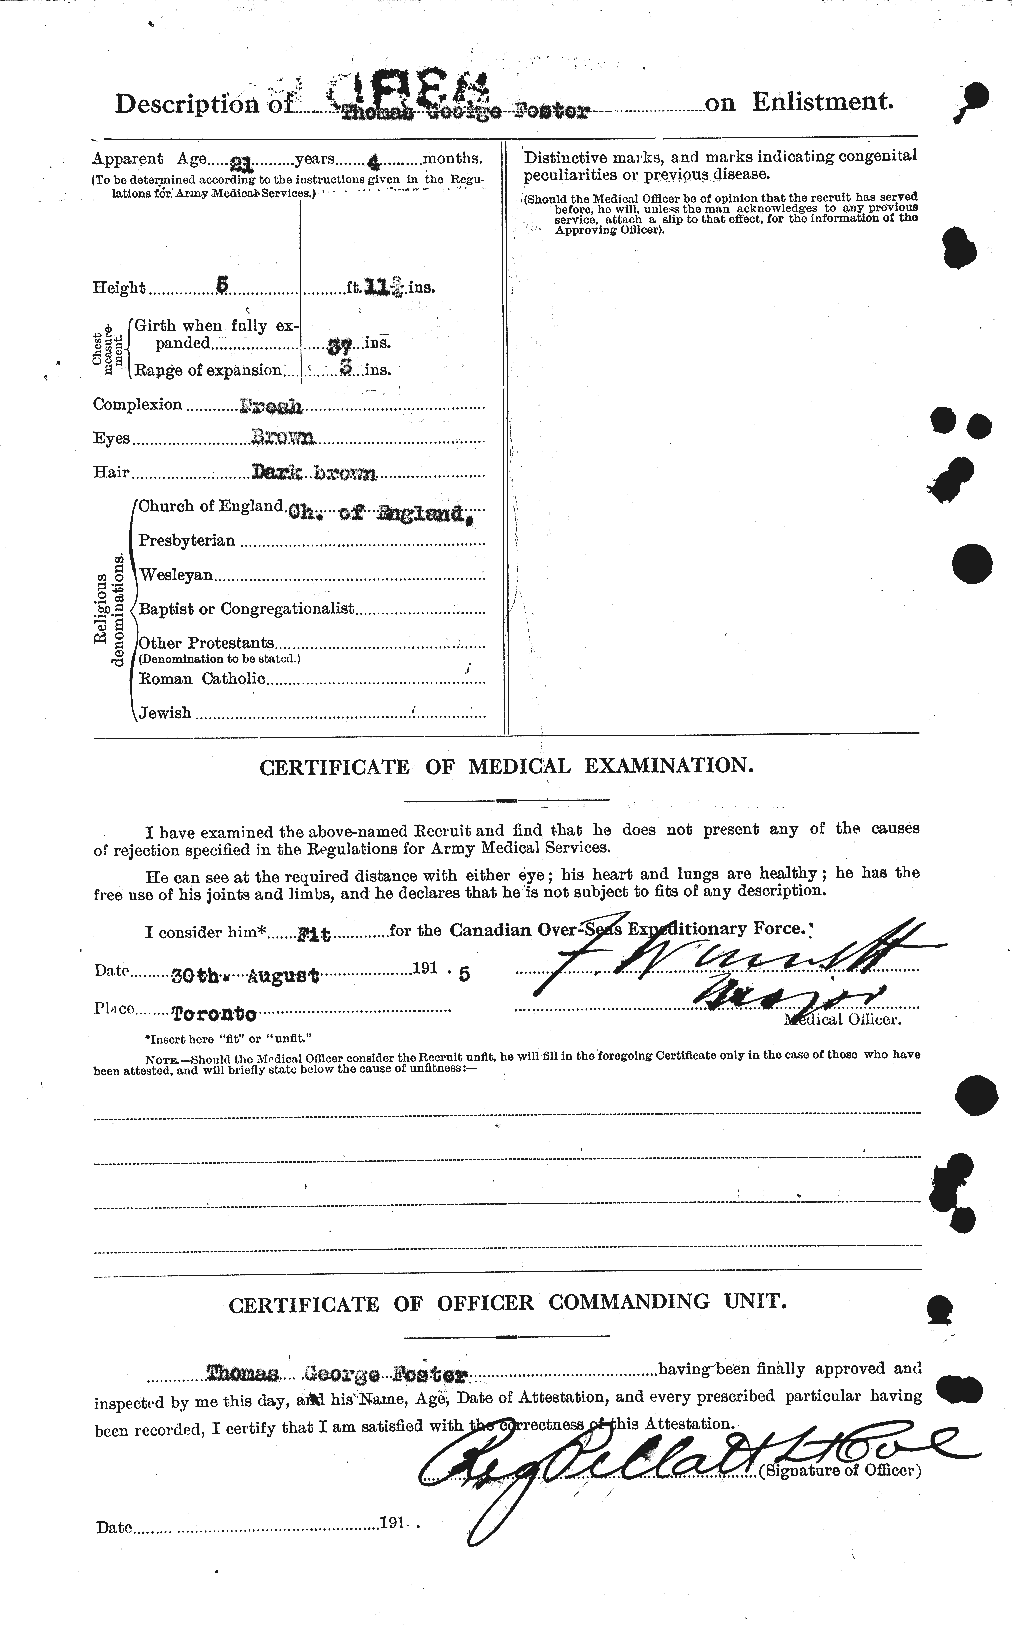 Personnel Records of the First World War - CEF 335233b